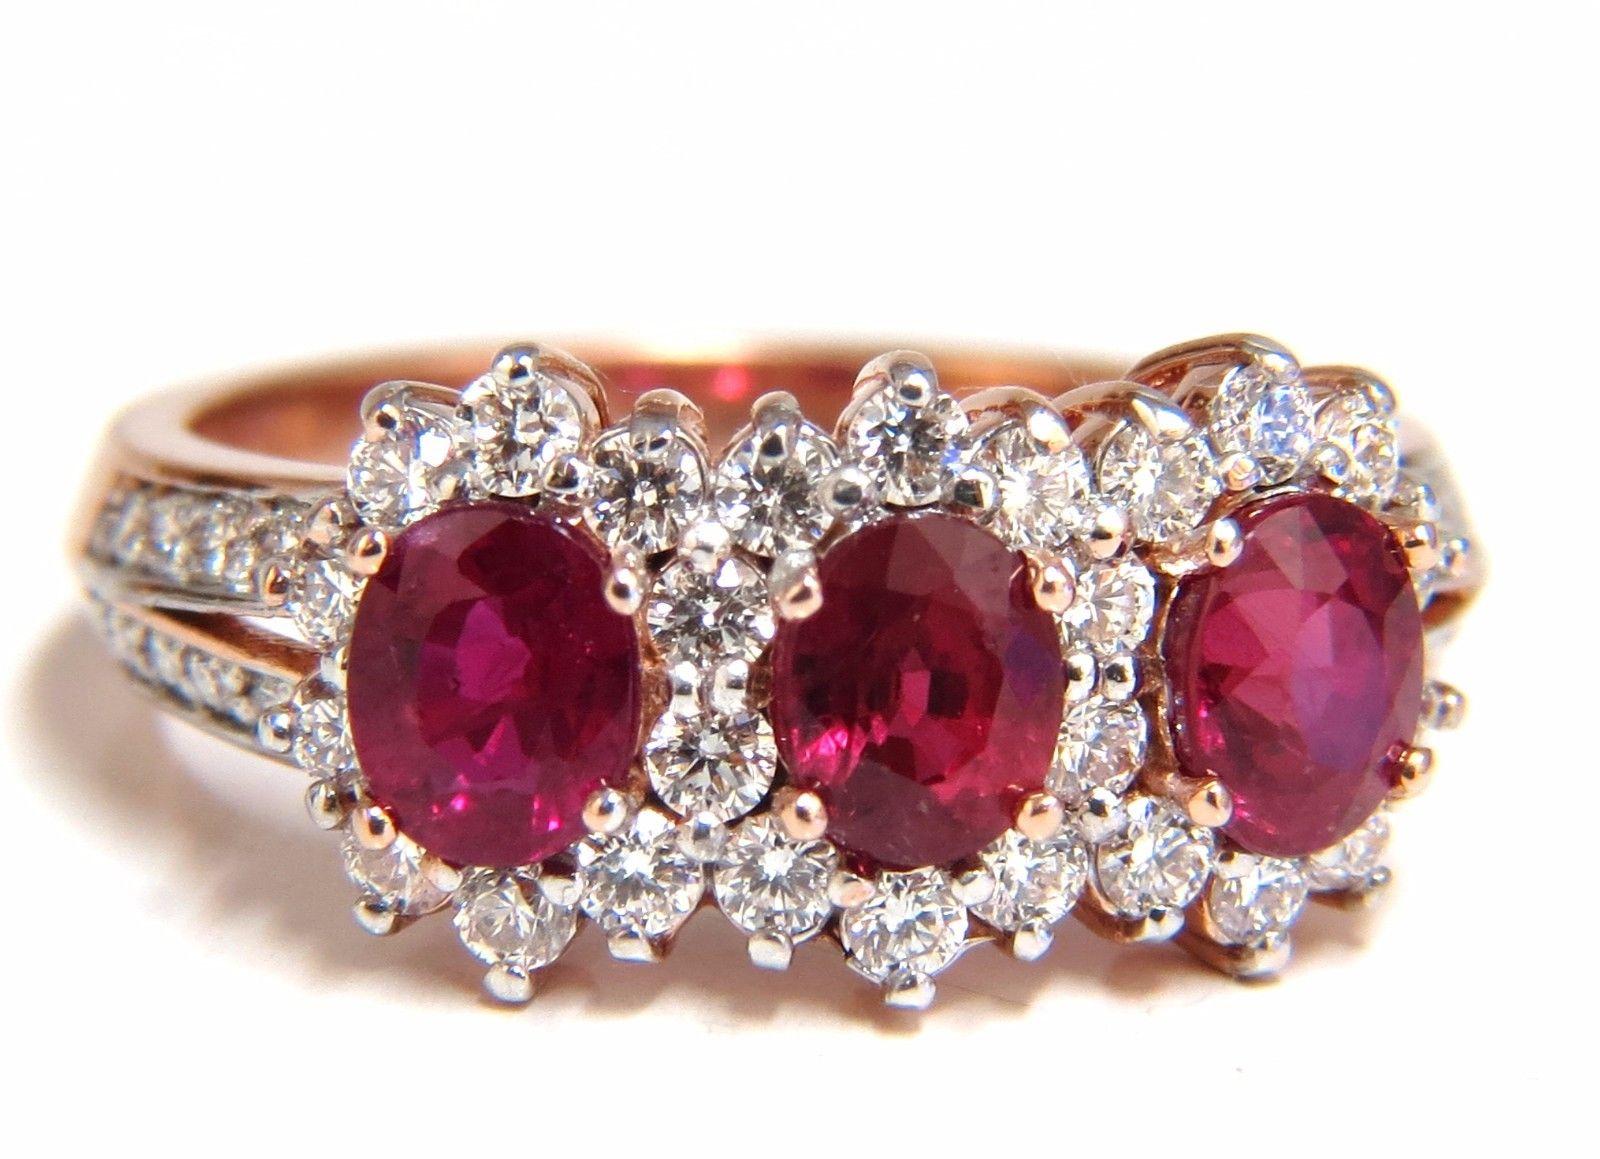 Ruby Halo Three's

1.84ct natural Rubies ring.

Vibrant vivid Reds

Transparent & clean clarity.

Oval cut brilliants

Average Each Ruby: 4.2 x 5.4mm 

.71ct natural Side diamonds:

G-color Vs-2 clarity.

14kt. rose gold

4.1 grams

Deck of ring: